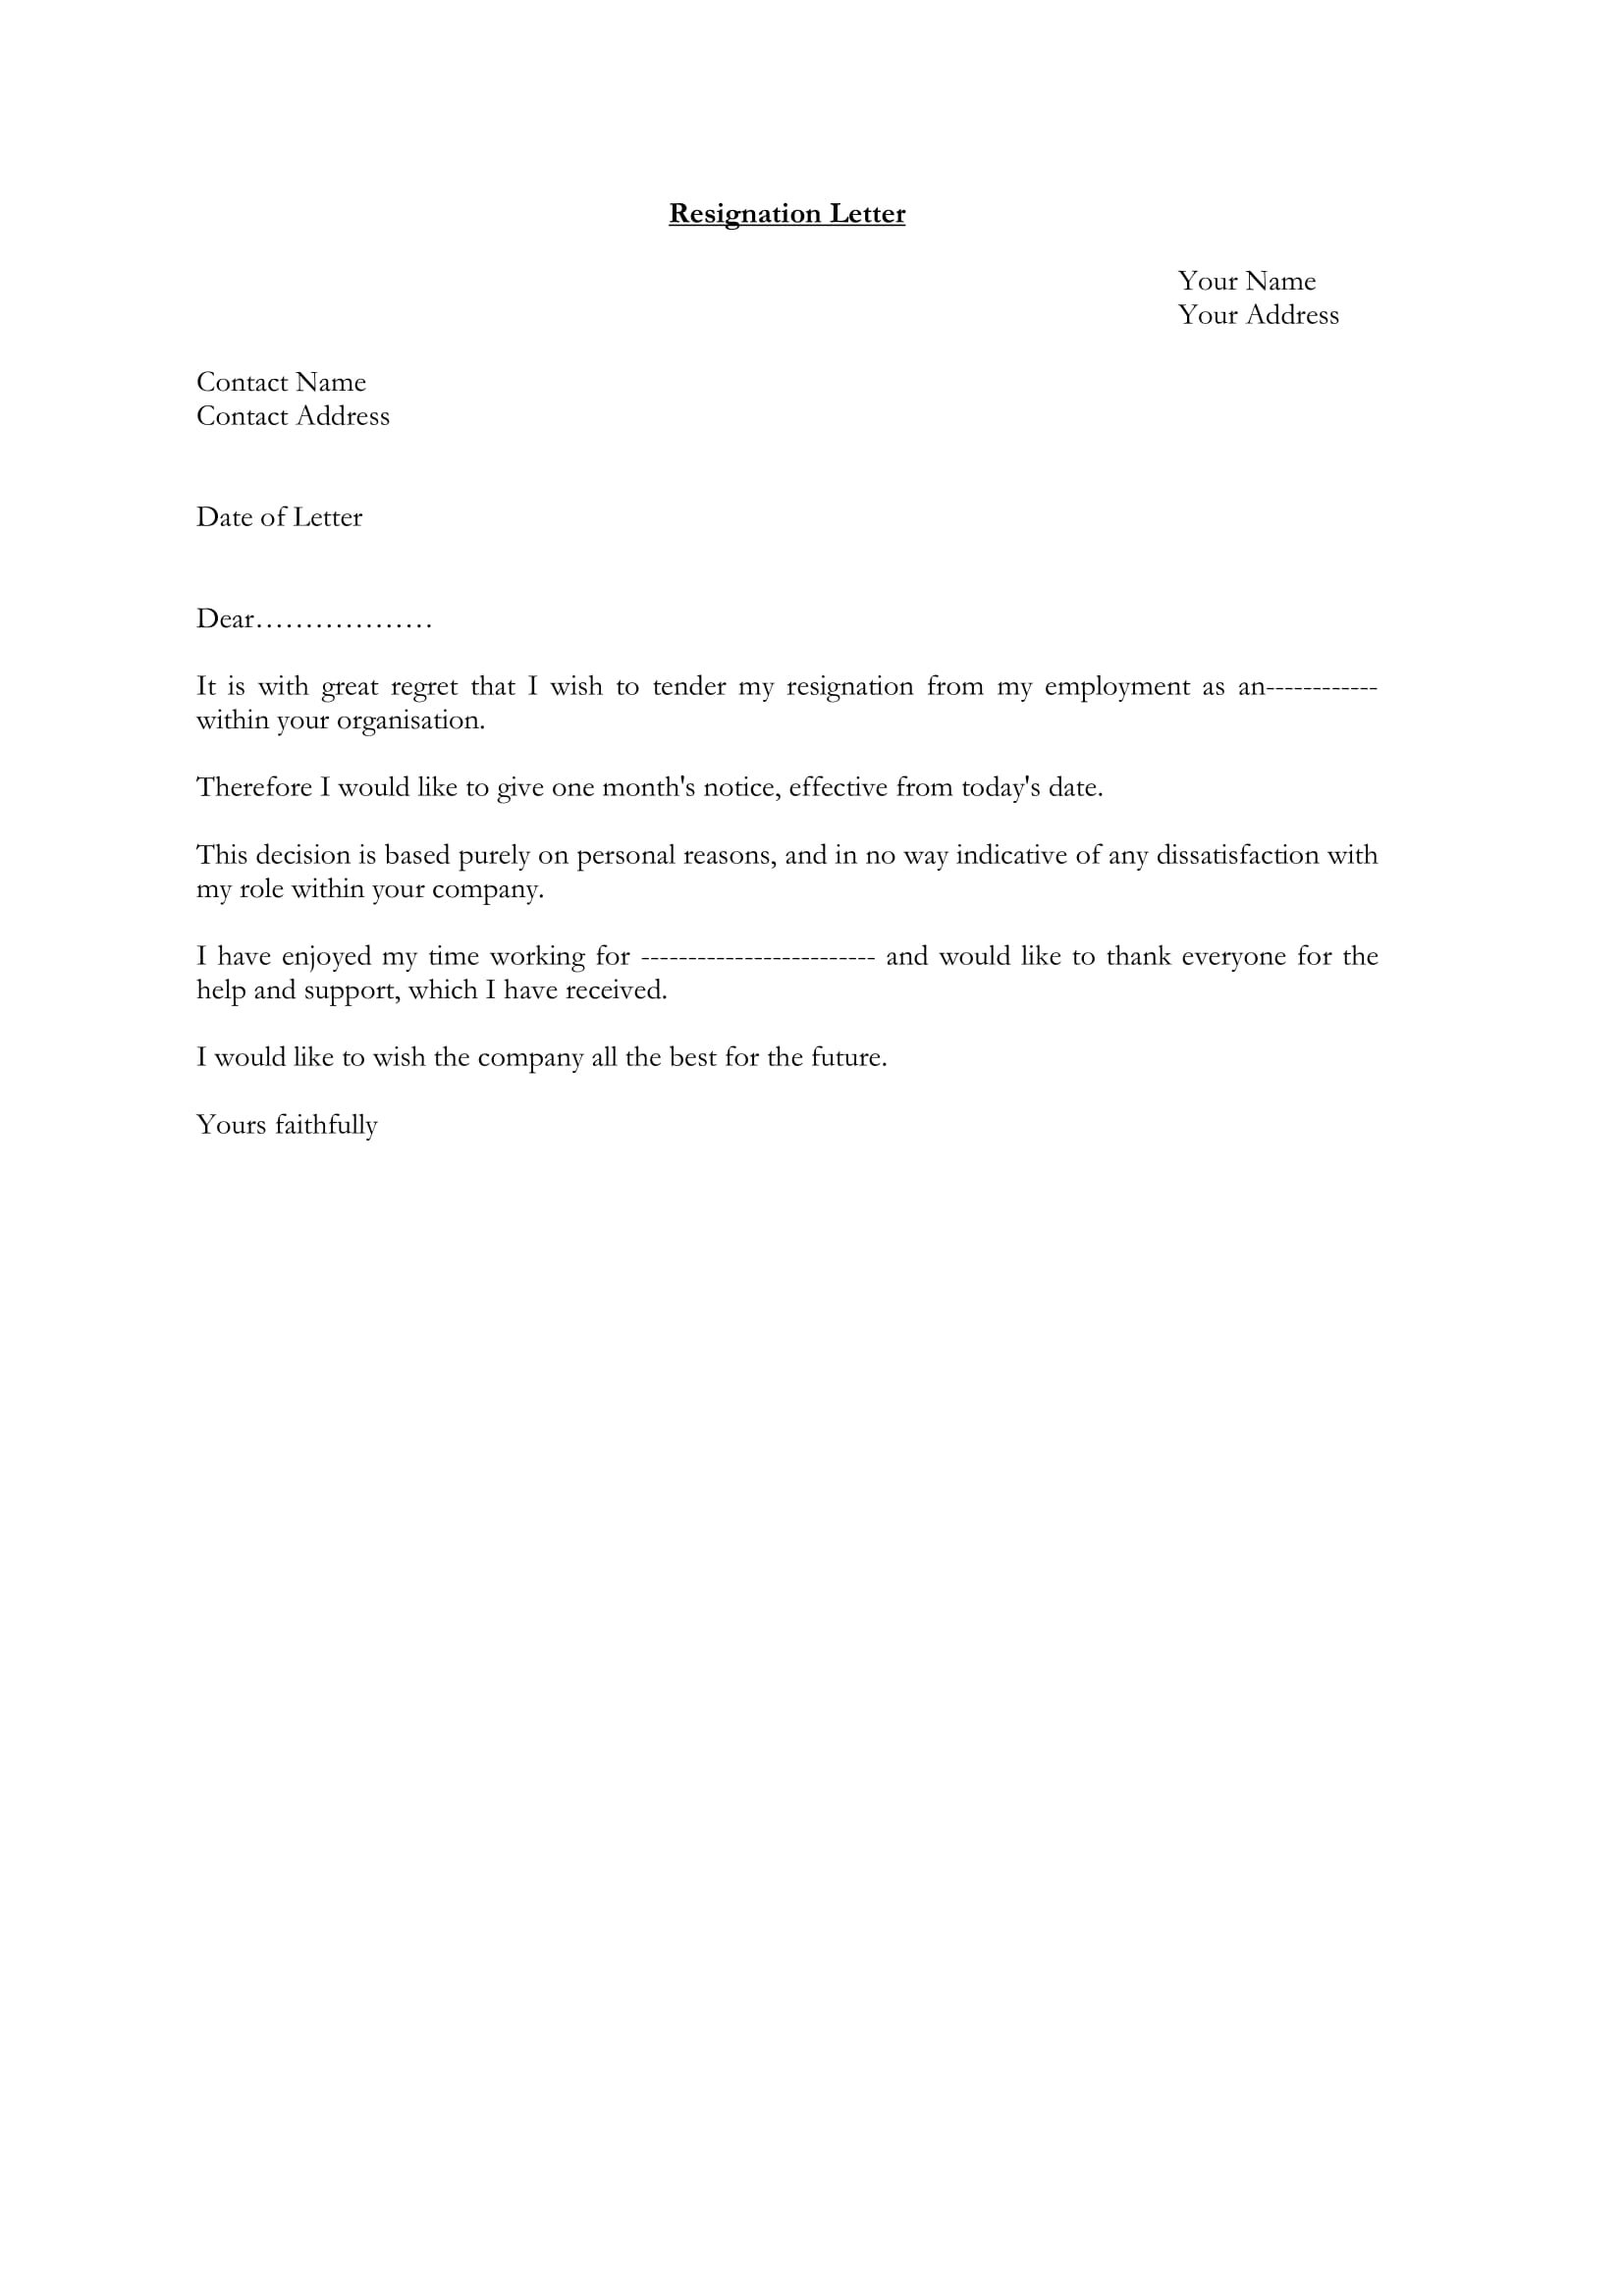 Standard Resignation Letter Examples  Pdf Word  Examples throughout Standard Resignation Letter Template